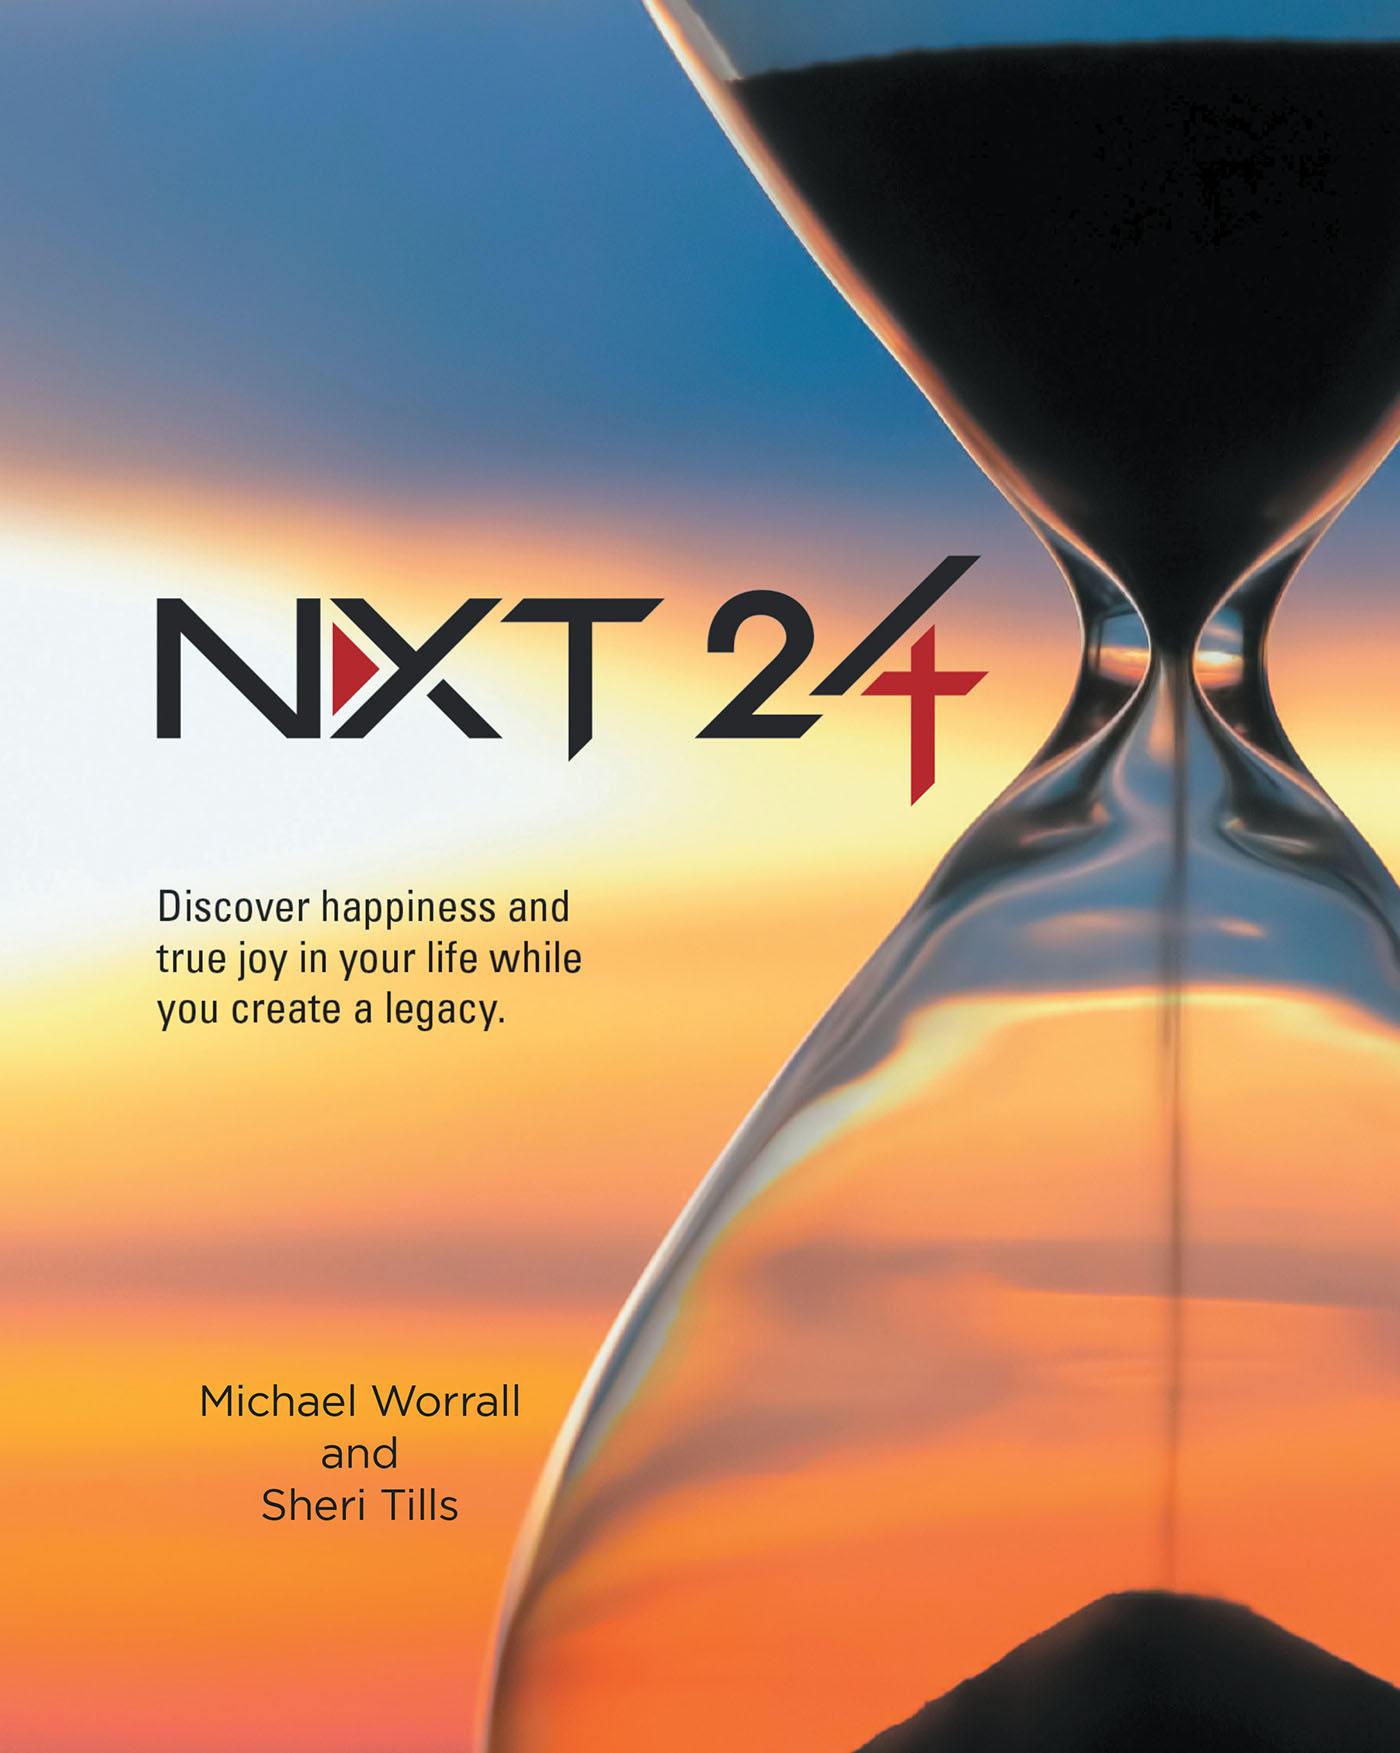 NXT 24 Cover Image